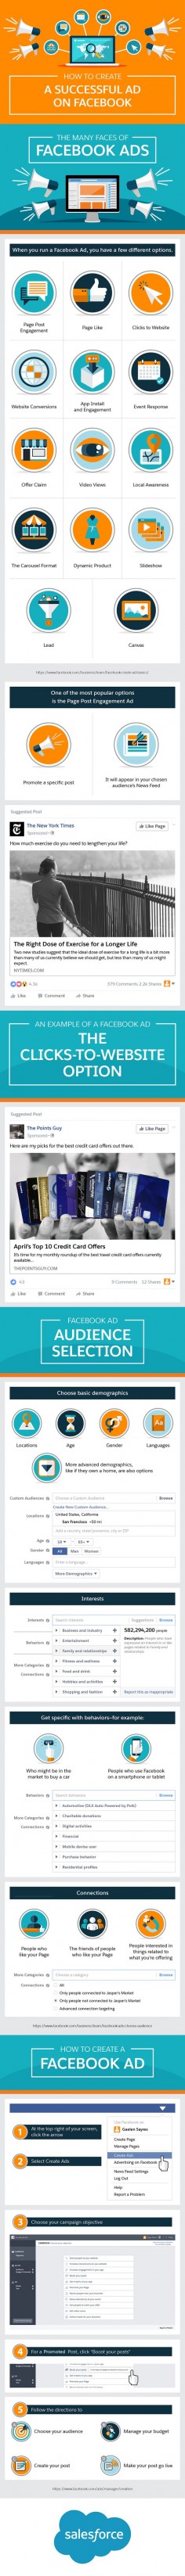 The Complete Guide to Getting Started with Facebook Ads - infographic